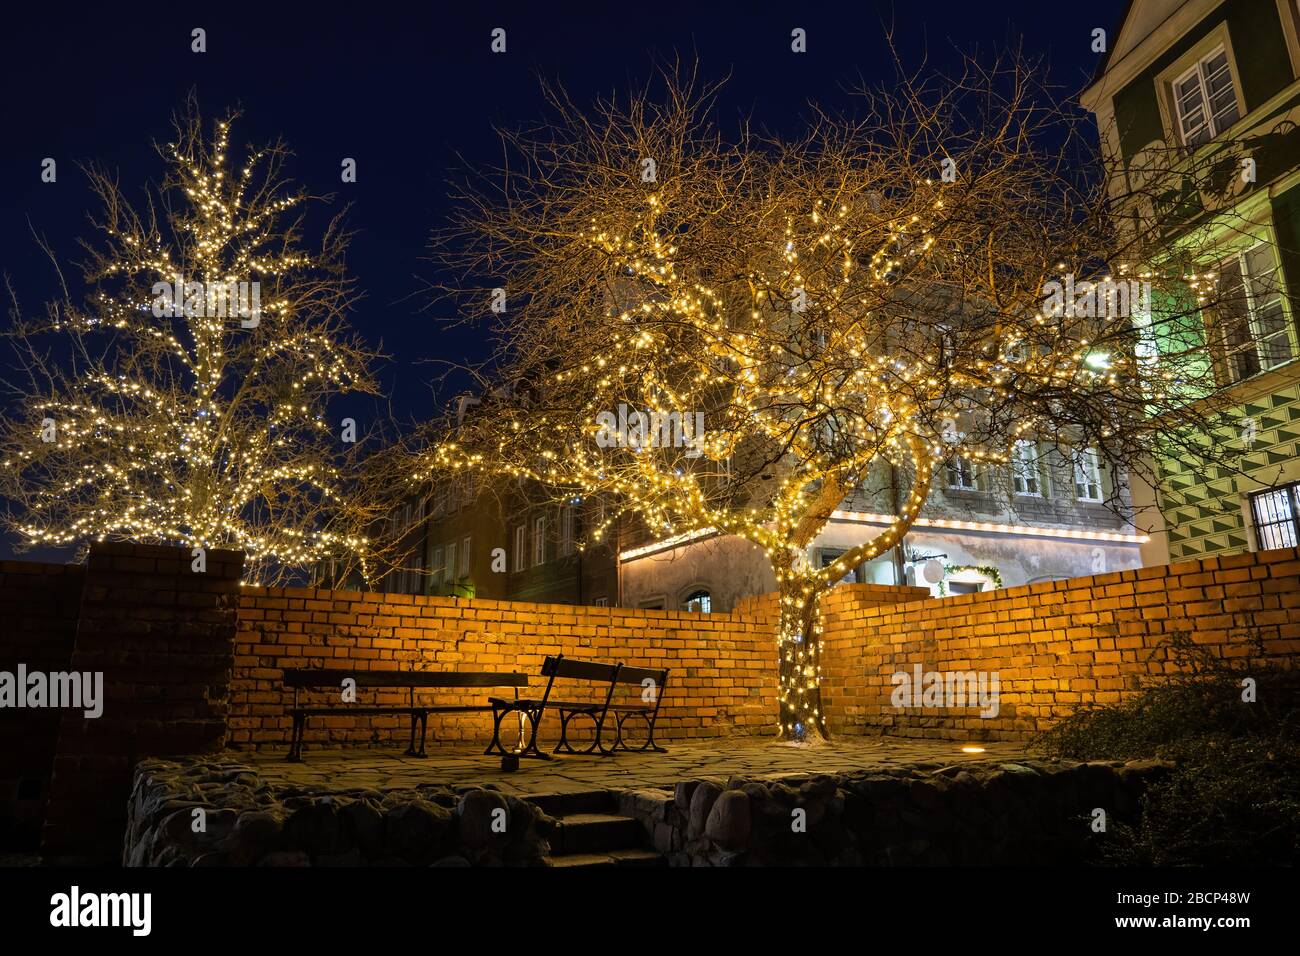 Small square with benches at night, illuminated trees during Christmas time, holiday season in Old Town of Warsaw city in Poland. Stock Photo